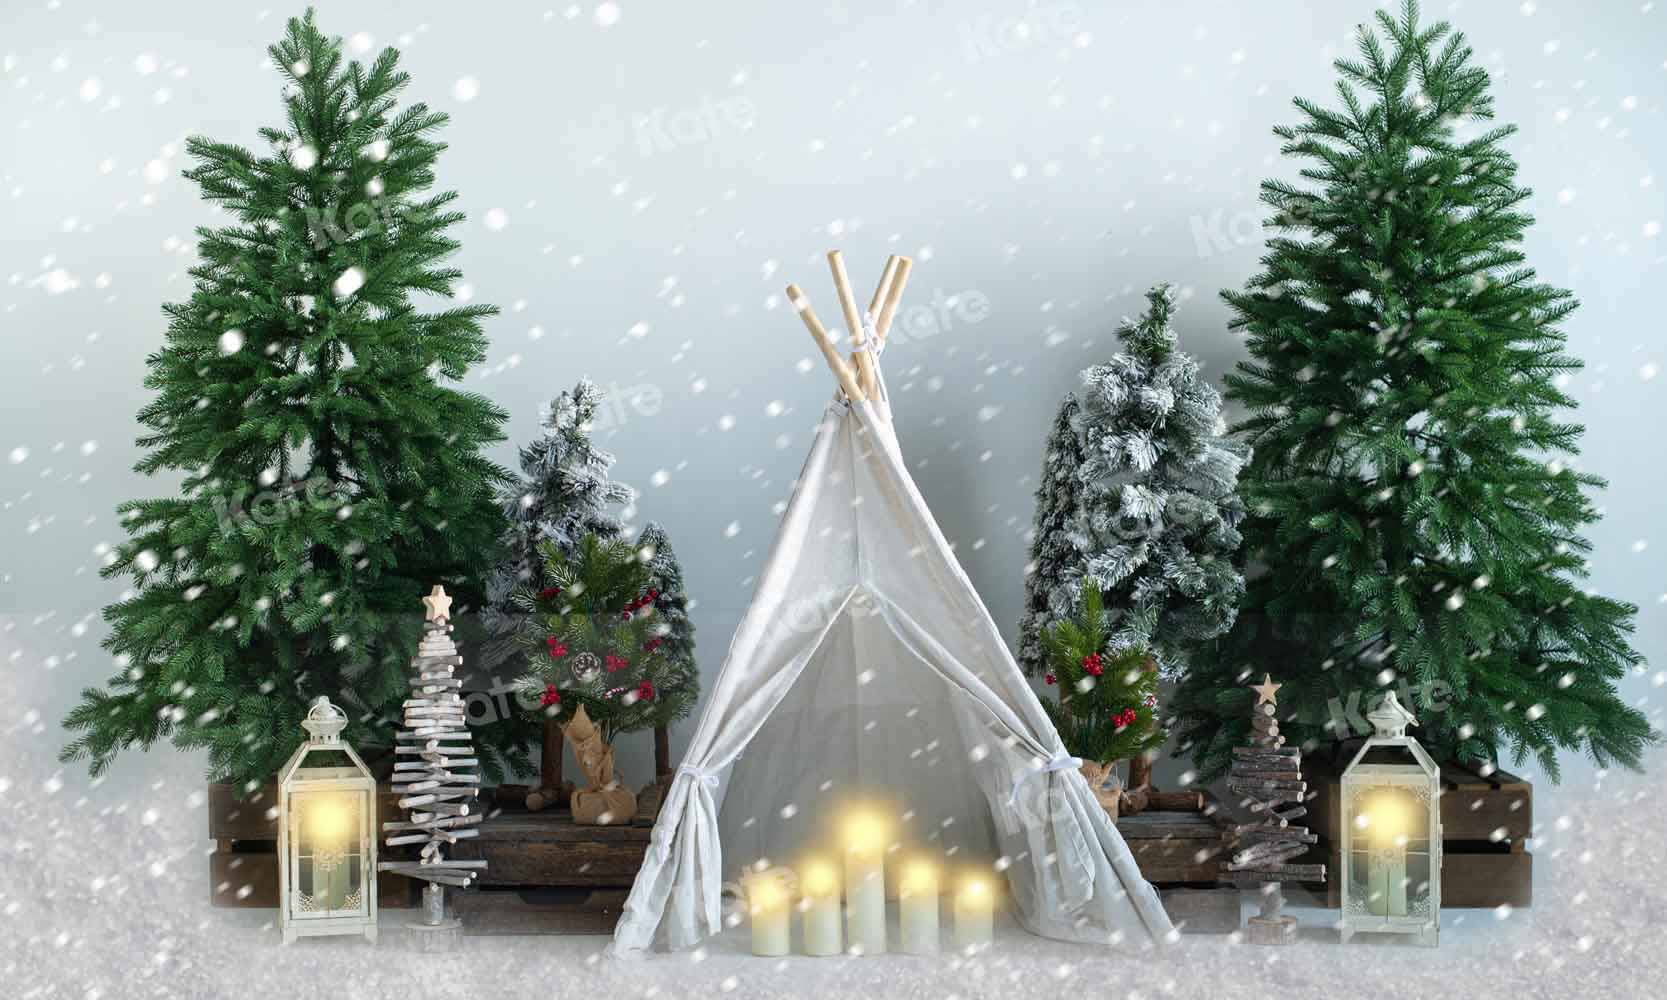 Kate Christmas Snow Tent Backdrop Designed by Emetselch